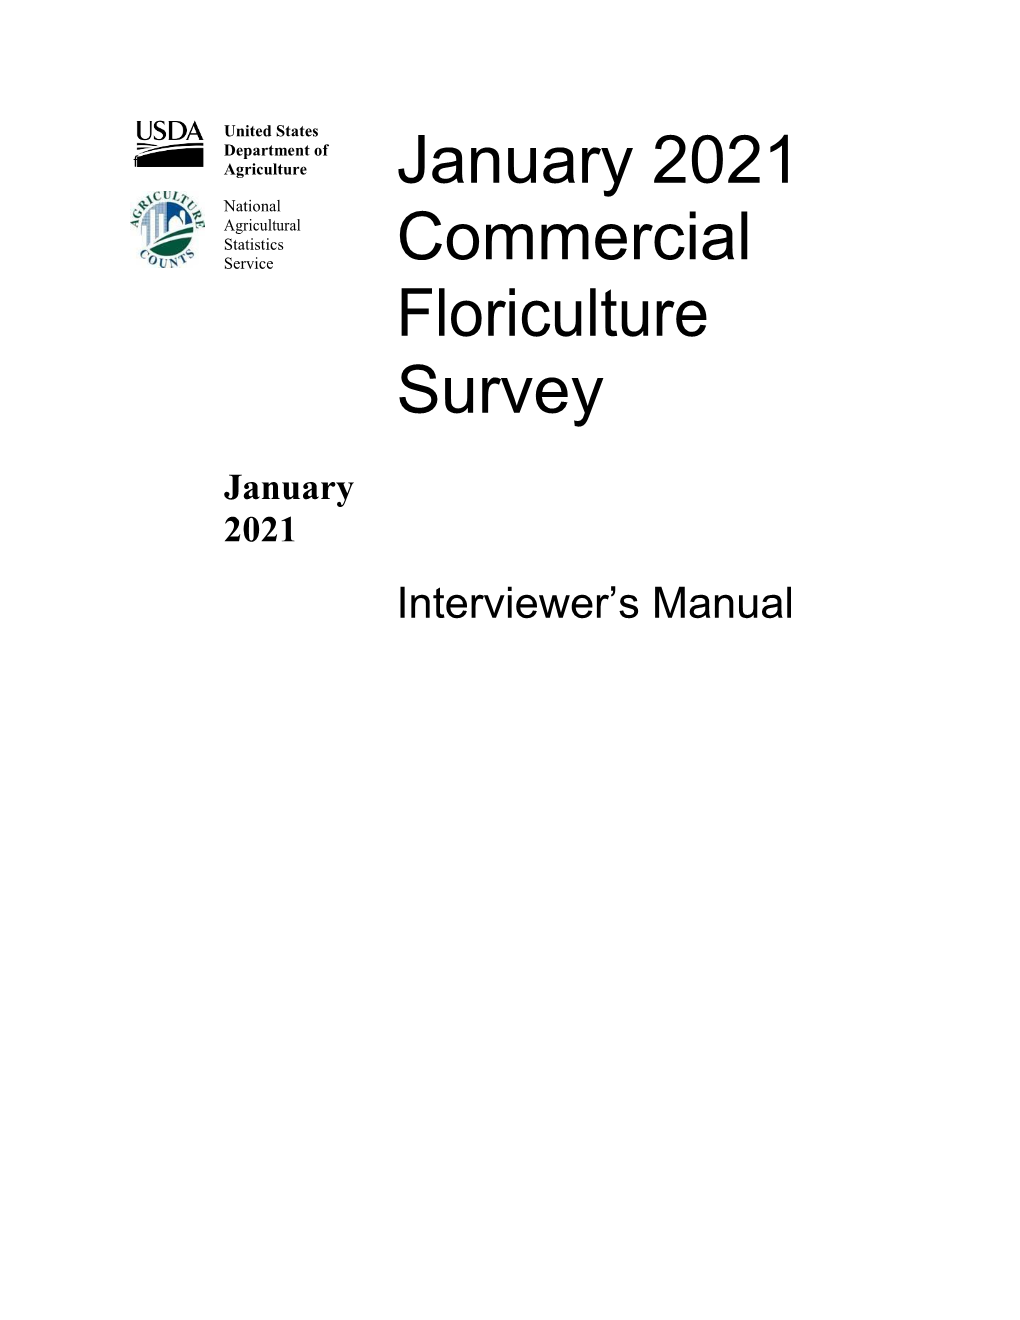 January 2021 Commercial Floriculture Survey Interviewer's Manual